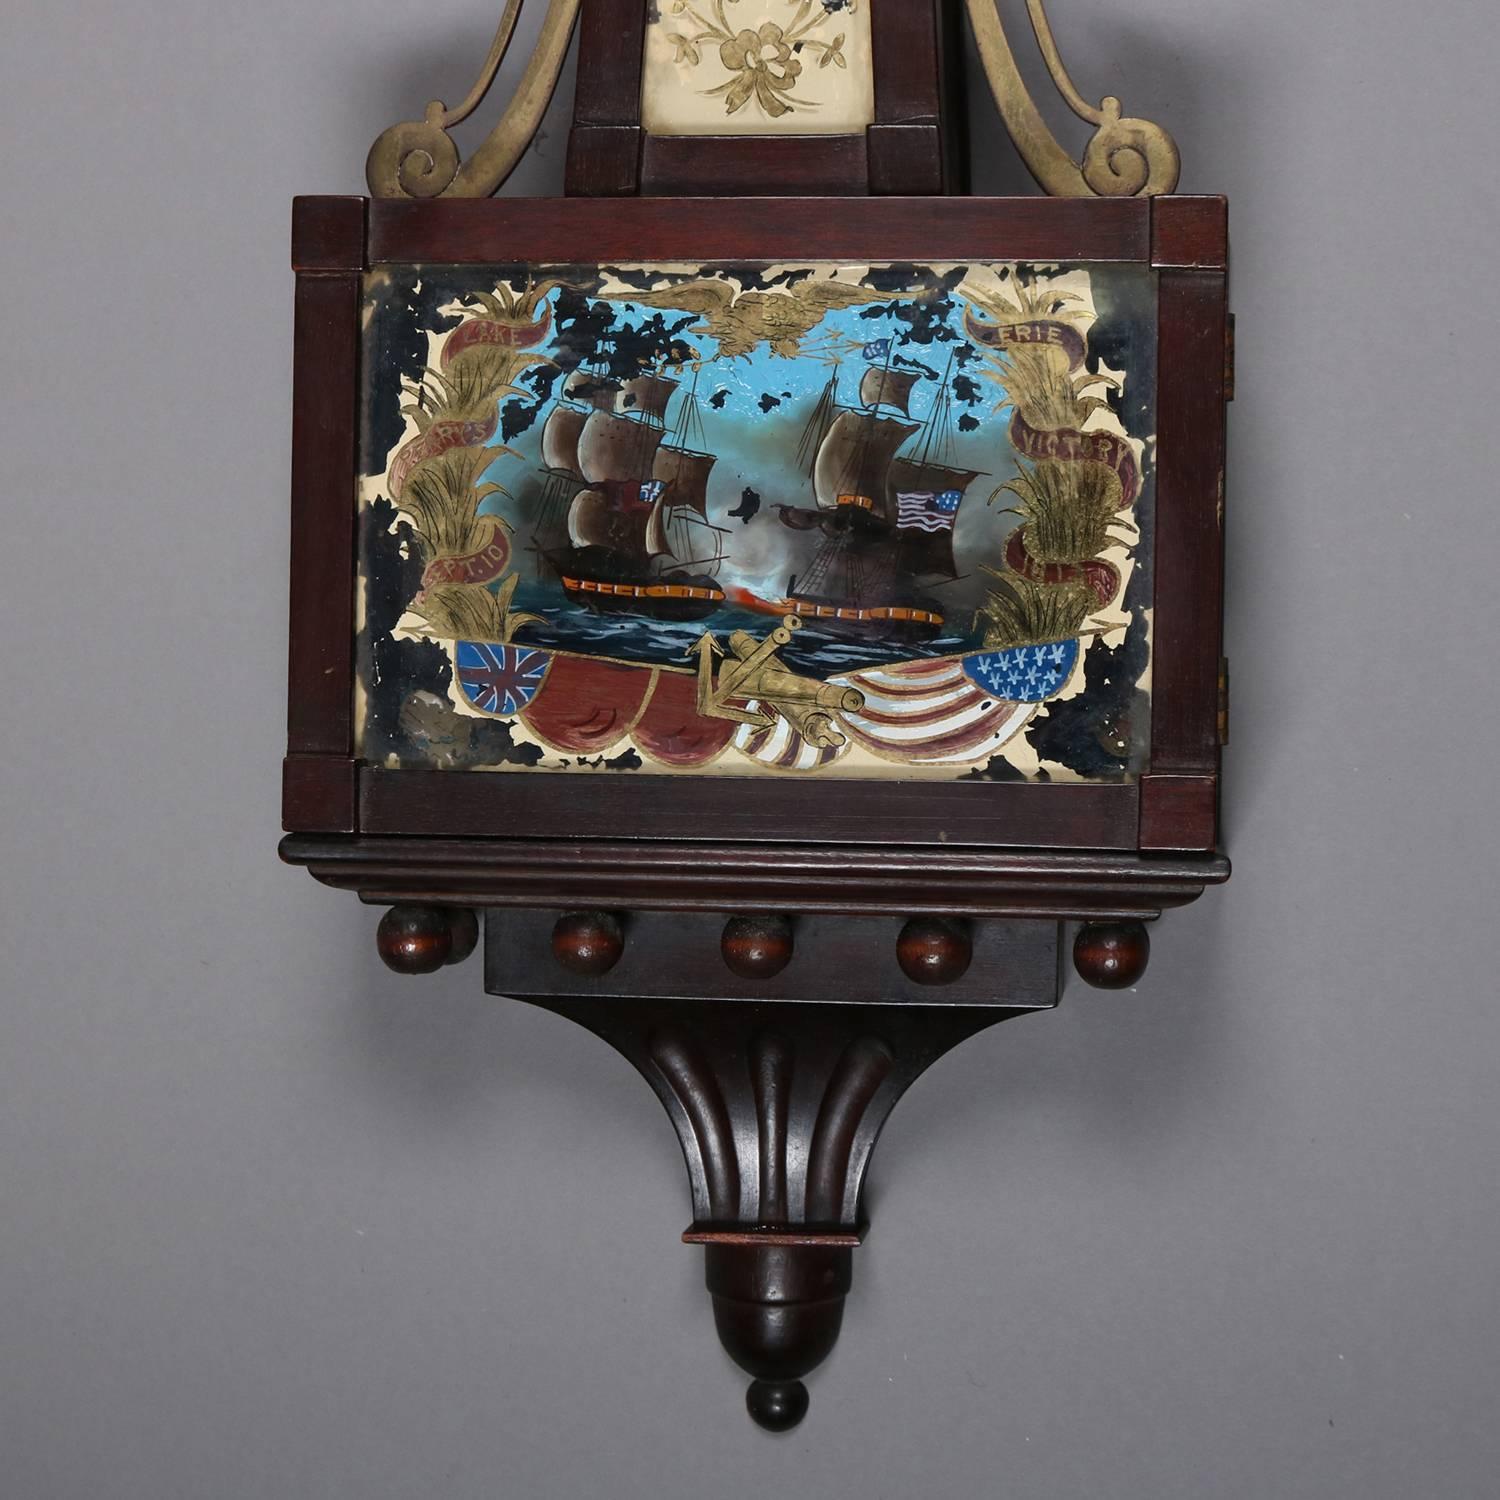 Federal style patriotic banjo wall clock features mahogany case with hand painted glass panels of seascape, central shield and eagle, signed on face J. E. Caldwell & Co., working and with key, 20th century

Measures: 32